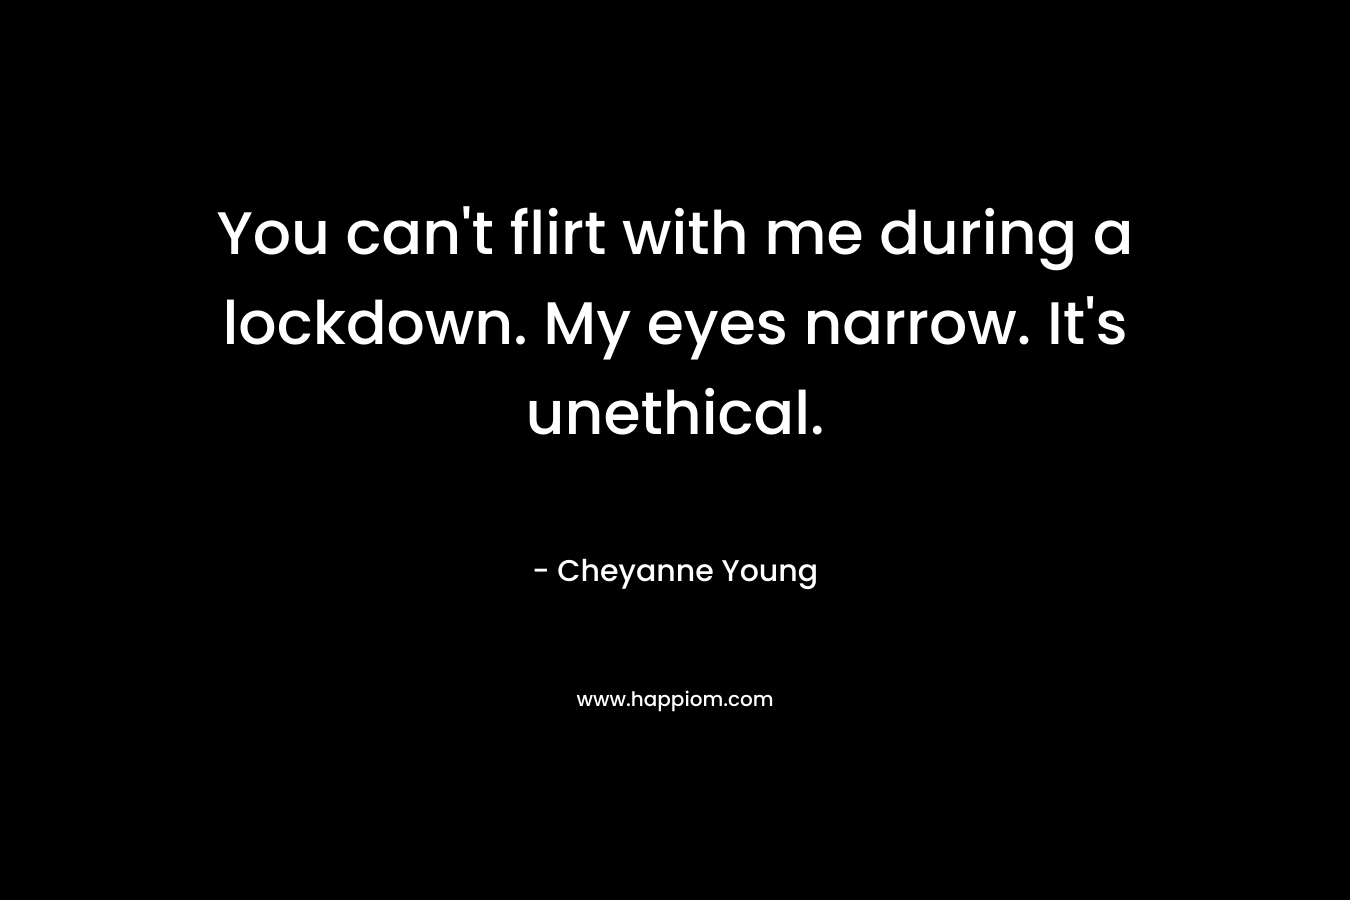 You can’t flirt with me during a lockdown. My eyes narrow. It’s unethical. – Cheyanne Young